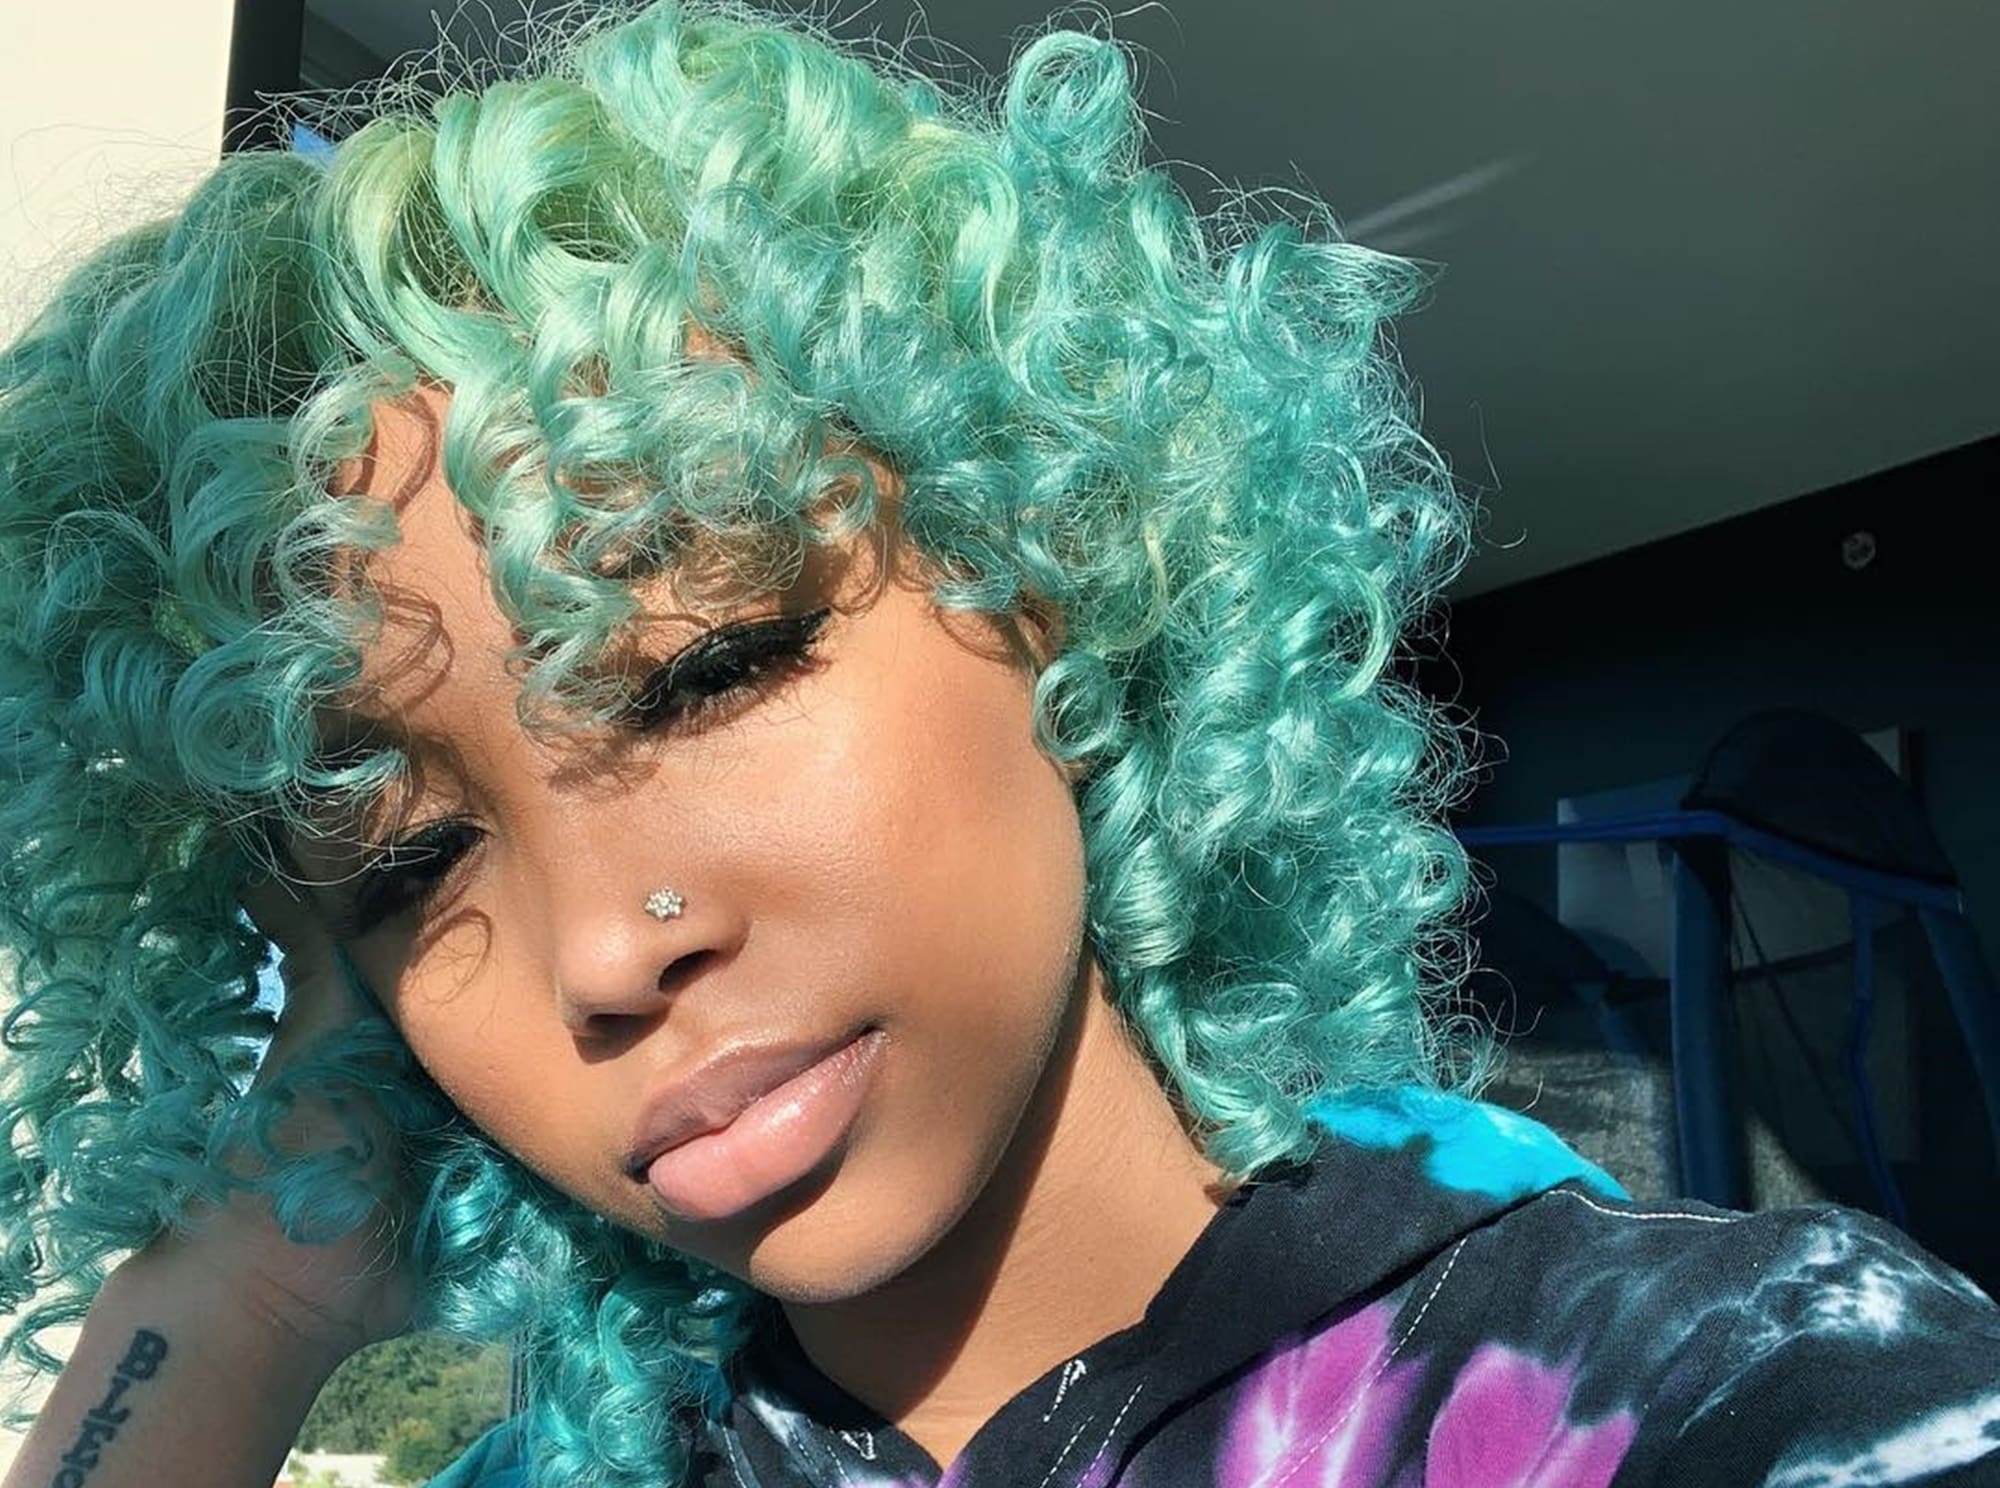 Zonnique Pullins' Latest Photos From Hawaii Have Fans Praising Her Beauty